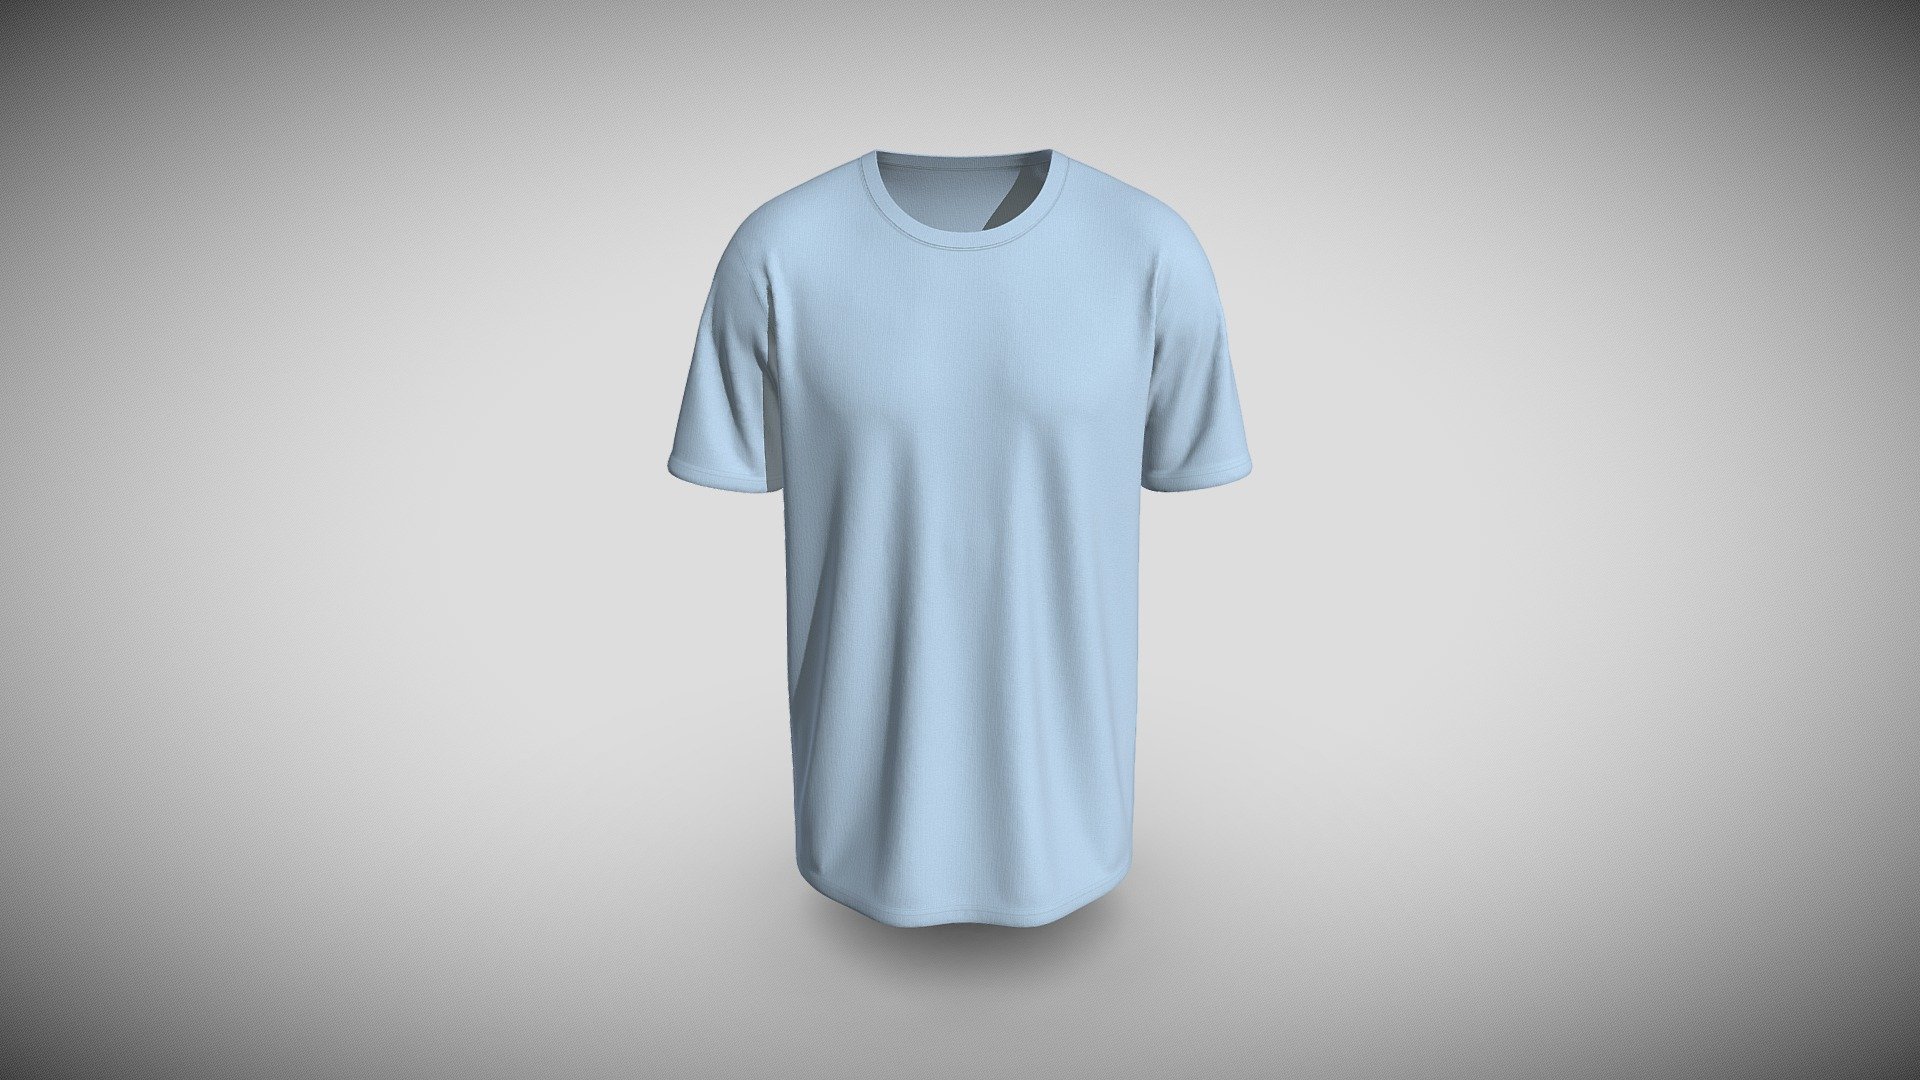 Cloth Title = Comfortable T-Shirts Design  

SKU = DG100131 

Category = Unisex 

Product Type = Tee 

Cloth Length = Regular 

Body Fit = Regular Fit 

Occasion = Casual  

Sleeve Style = Set In Sleeve 


Our Services:

3D Apparel Design.

OBJ,FBX,GLTF Making with High/Low Poly.

Fabric Digitalization.

Mockup making.

3D Teck Pack.

Pattern Making.

2D Illustration.

Cloth Animation and 360 Spin Video.


Contact us:- 

Email: info@digitalfashionwear.com 

Website: https://digitalfashionwear.com 


We designed all the types of cloth specially focused on product visualization, e-commerce, fitting, and production. 

We will design: 

T-shirts 

Polo shirts 

Hoodies 

Sweatshirt 

Jackets 

Shirts 

TankTops 

Trousers 

Bras 

Underwear 

Blazer 

Aprons 

Leggings 

and All Fashion items. 





Our goal is to make sure what we provide you, meets your demand 3d model